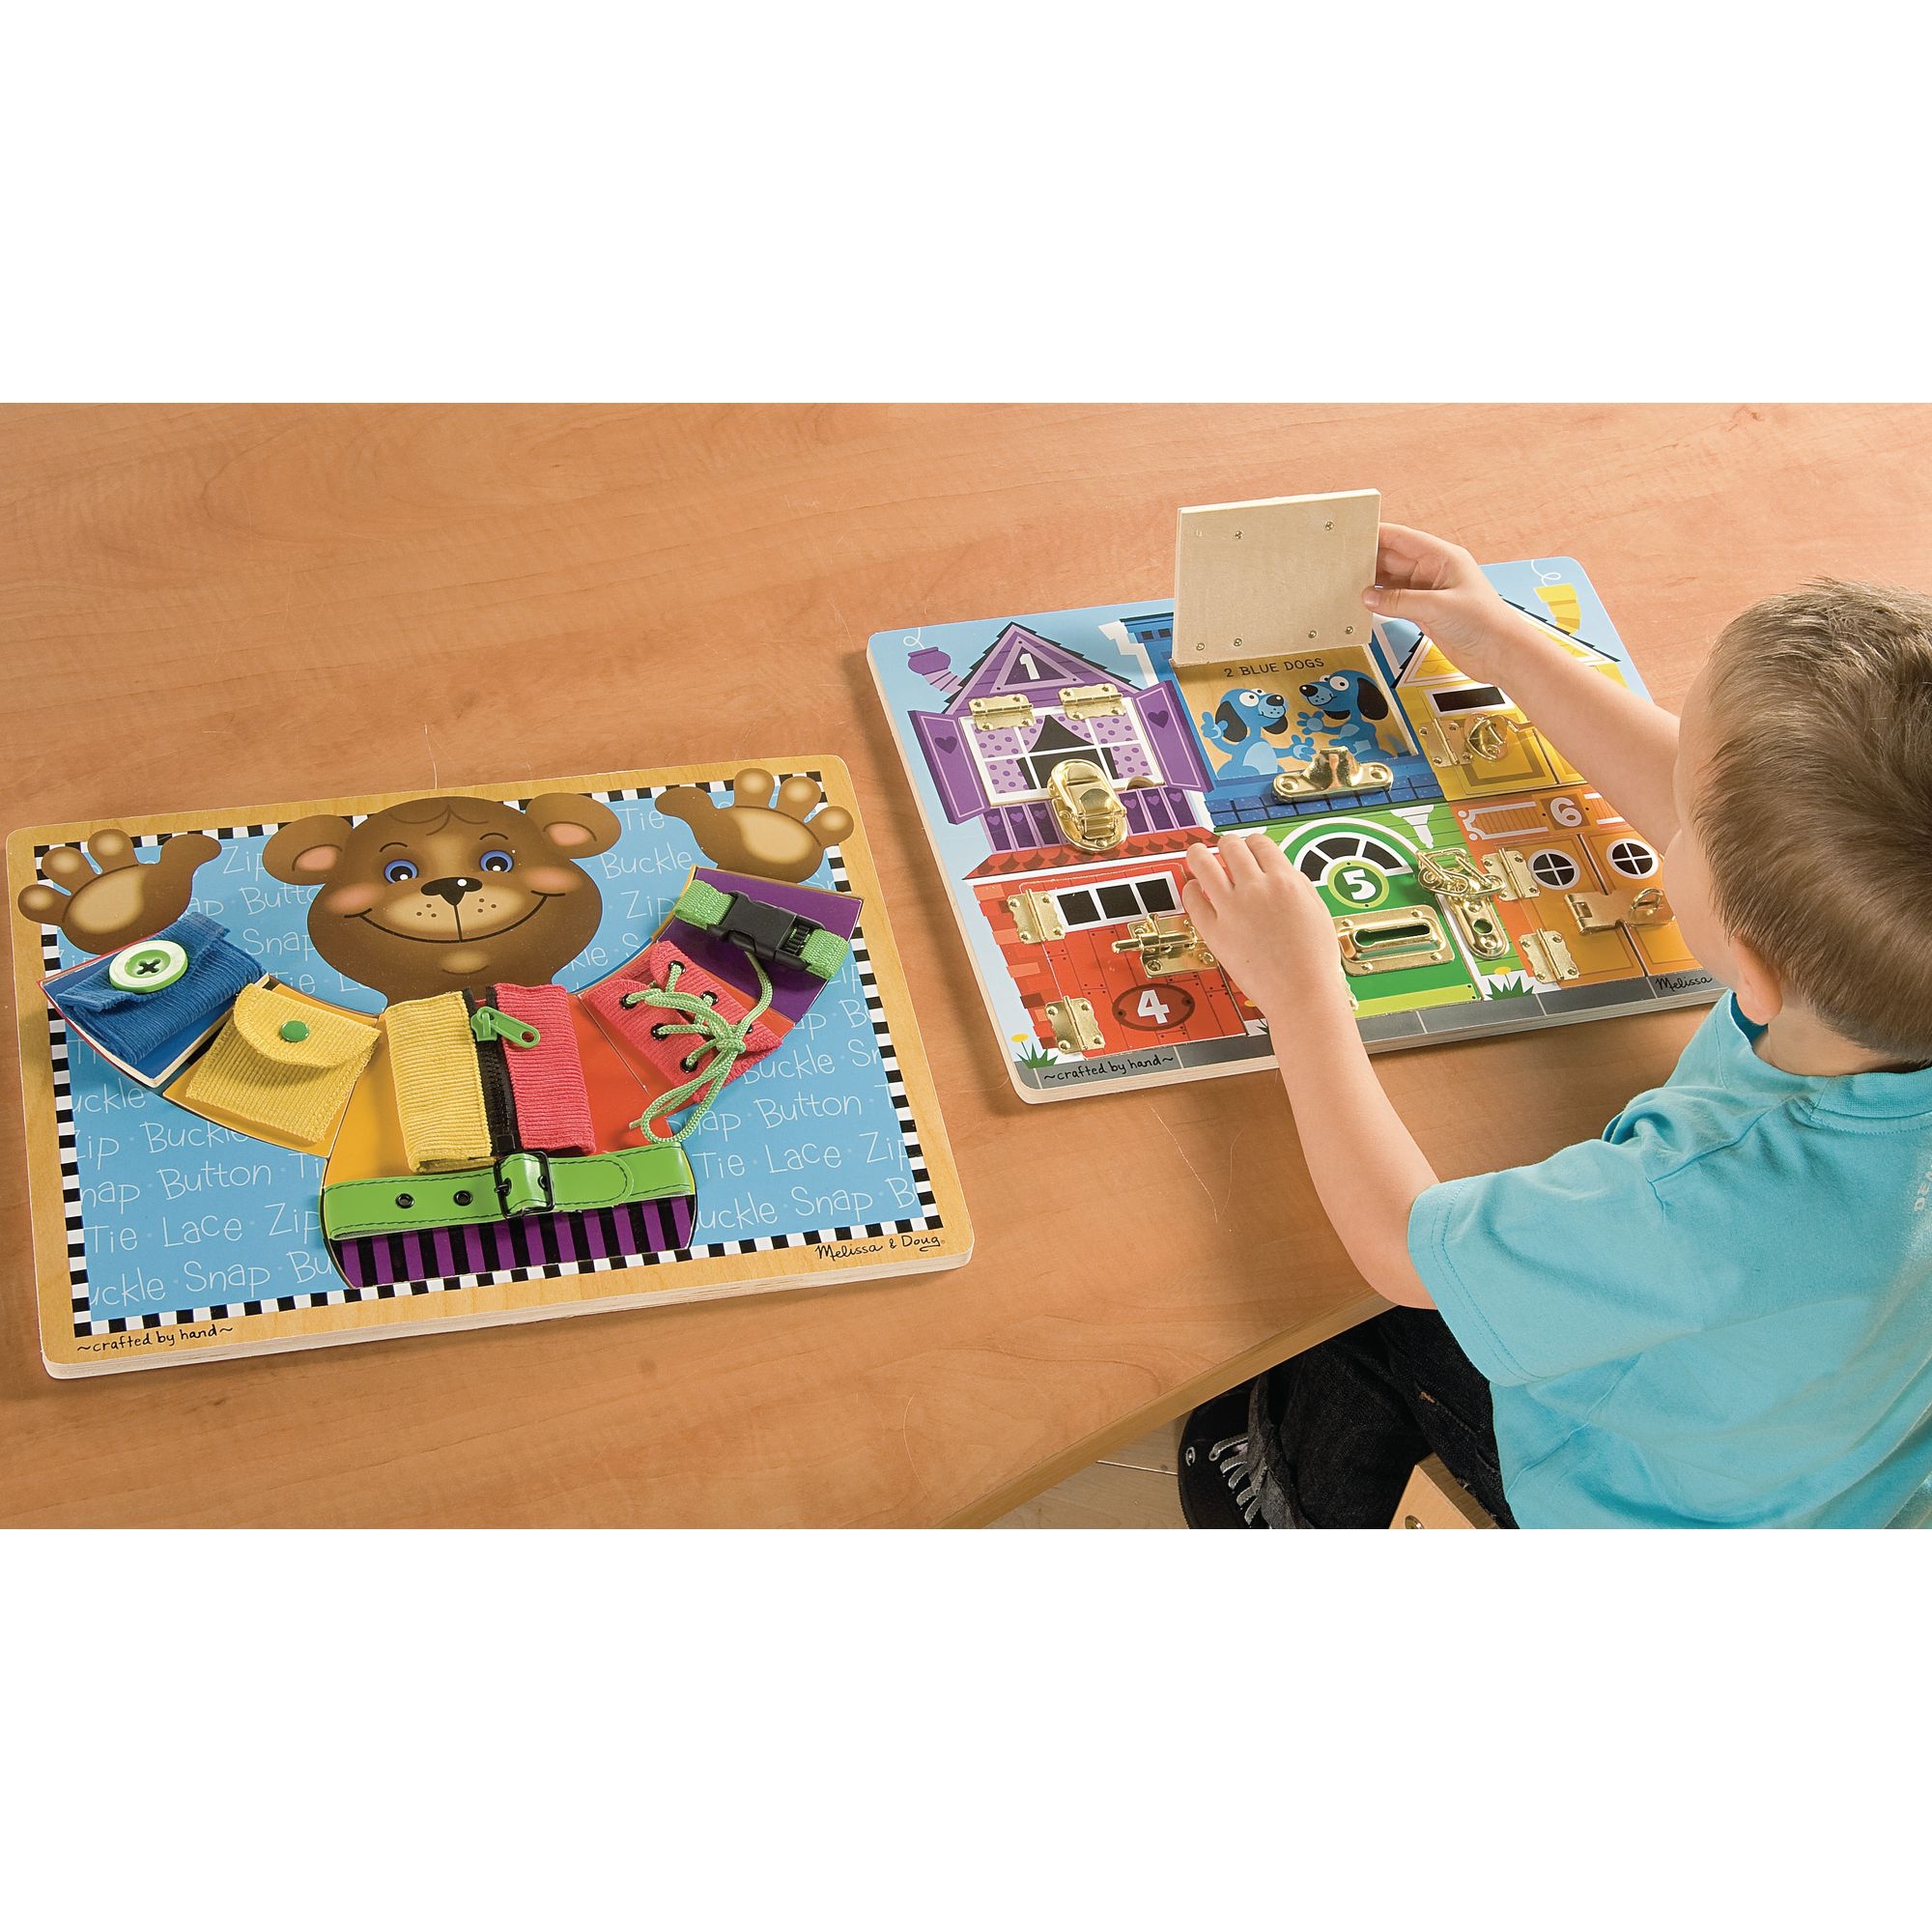 Latches Board and Basic Skills Board Offer